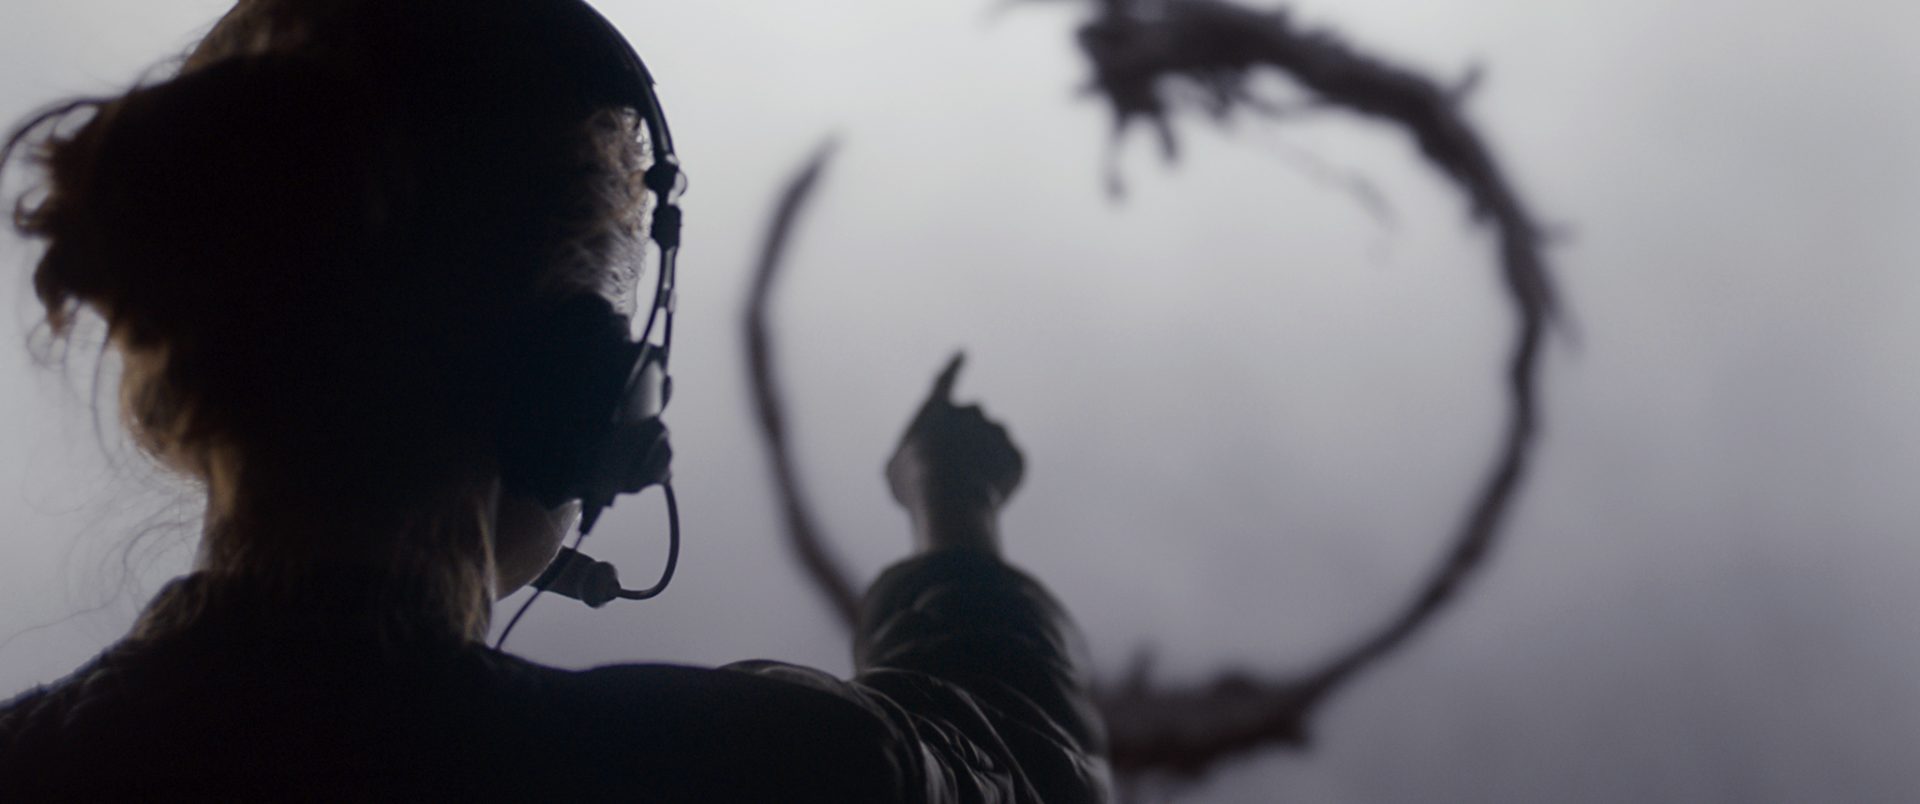 A scene from the movie Arrival, a character named Louise Banks is pointing towards an alien symbol